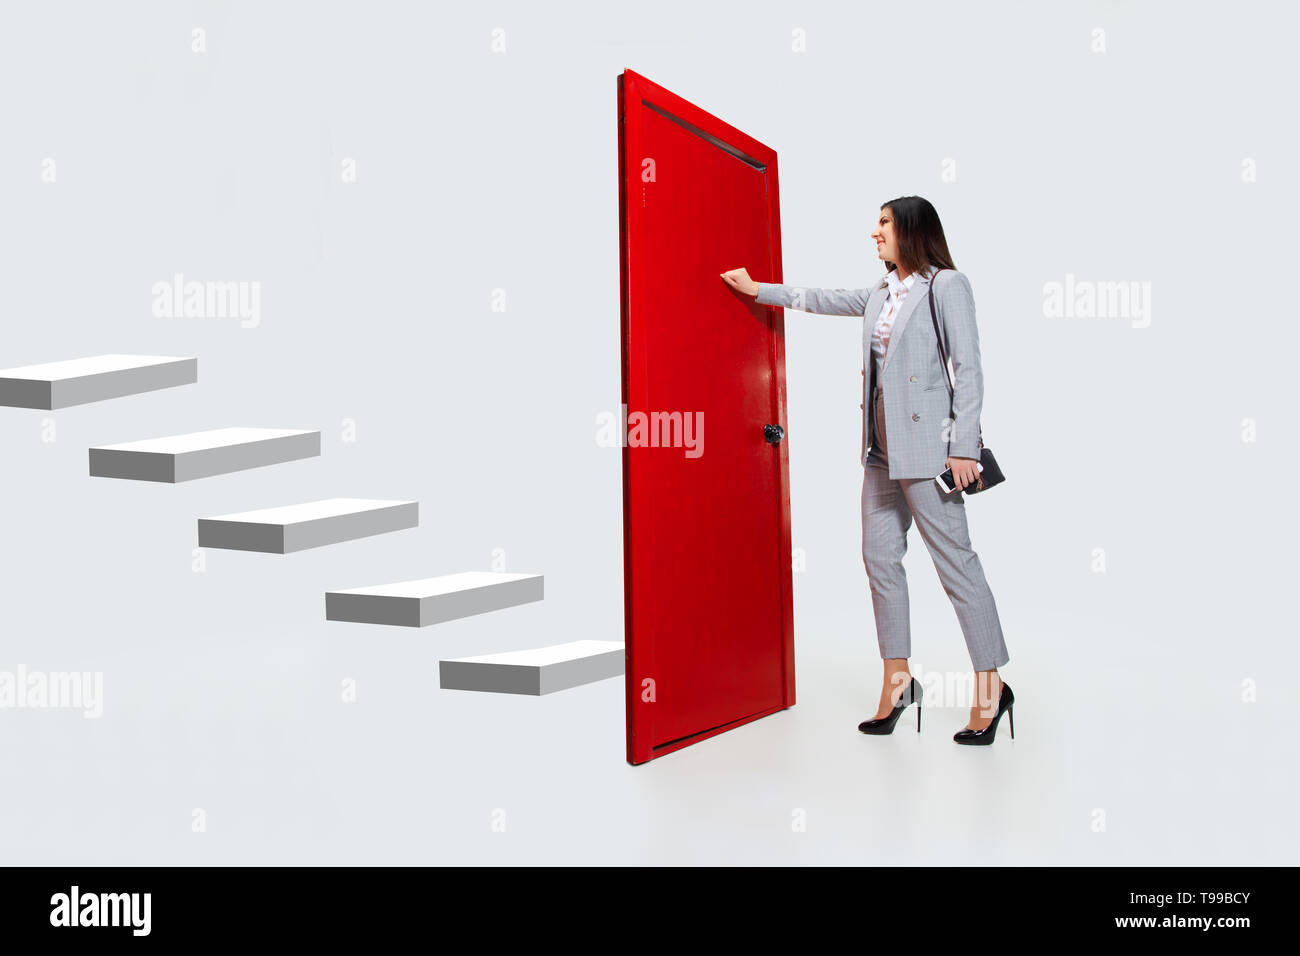 Knocking in emptiness. Young woman in grey suit trying to open the red door in career ladder, but it's closed. No way for motivation. Concept of office worker's troubles, business, problems, stress. Stock Photo